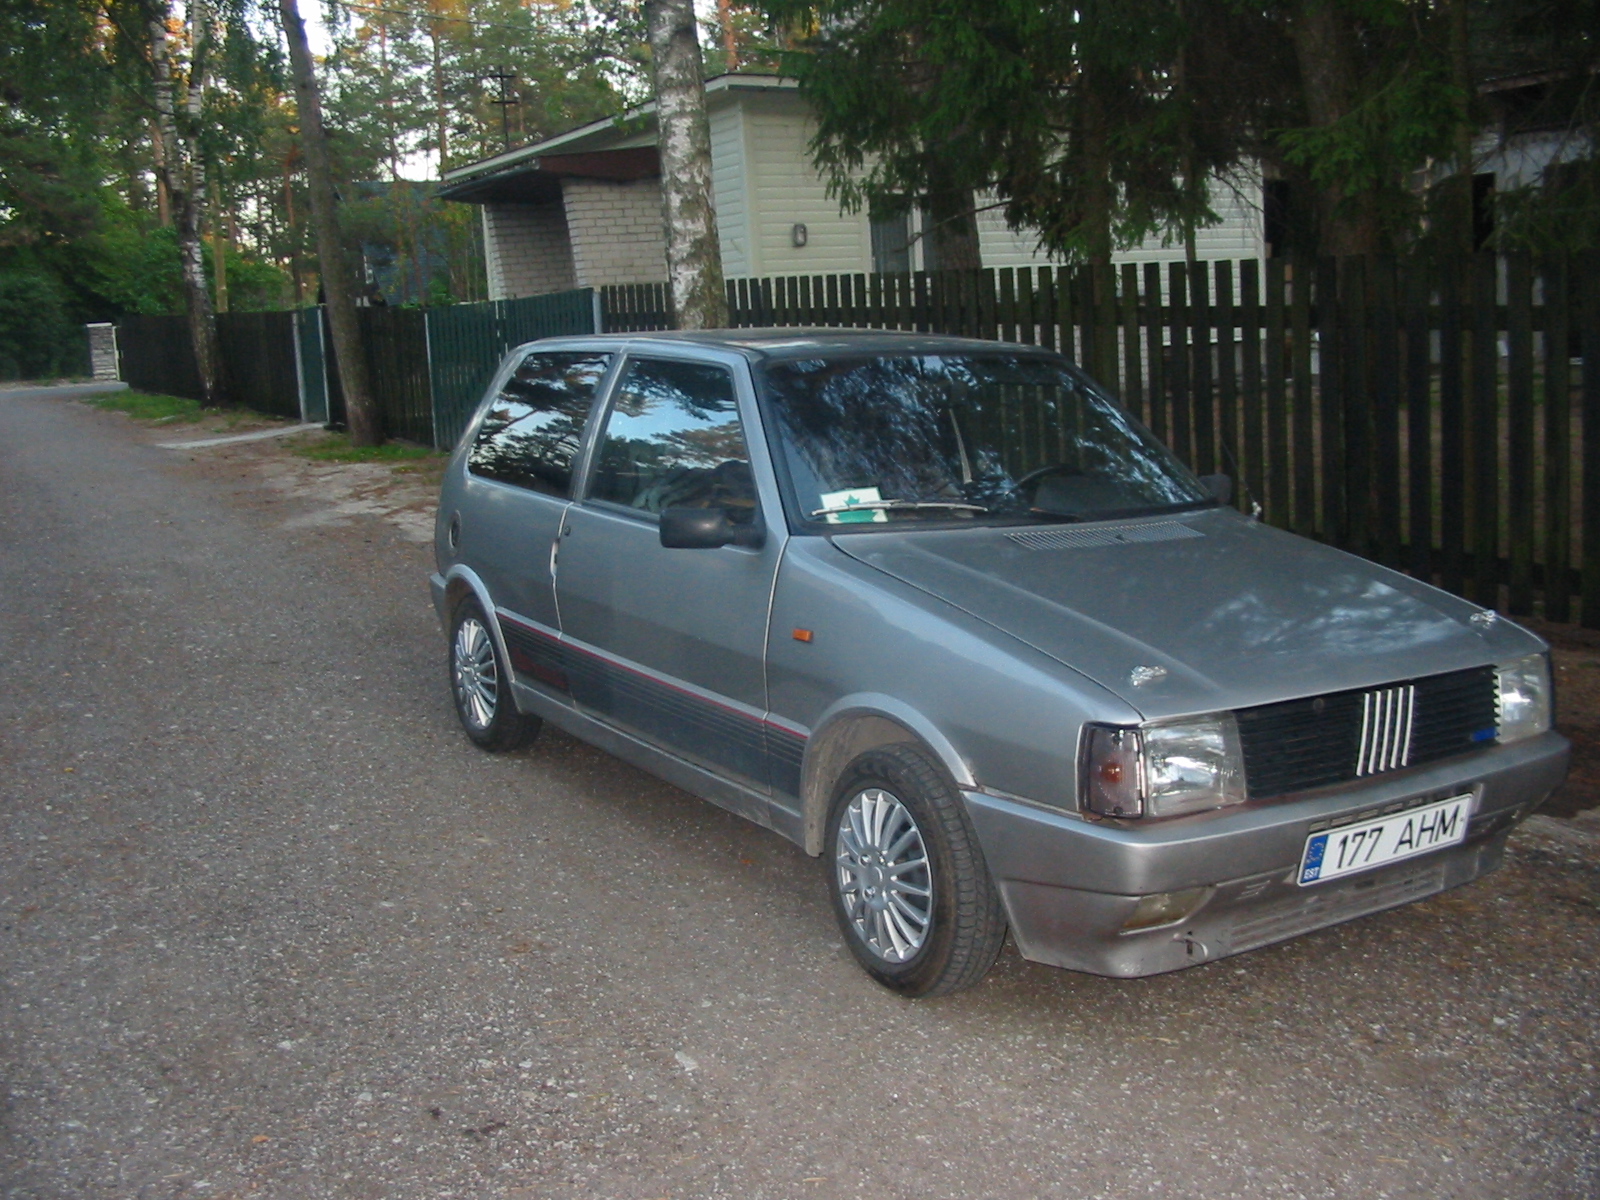 This is my fiat uno turbo It was first registered at 01011986